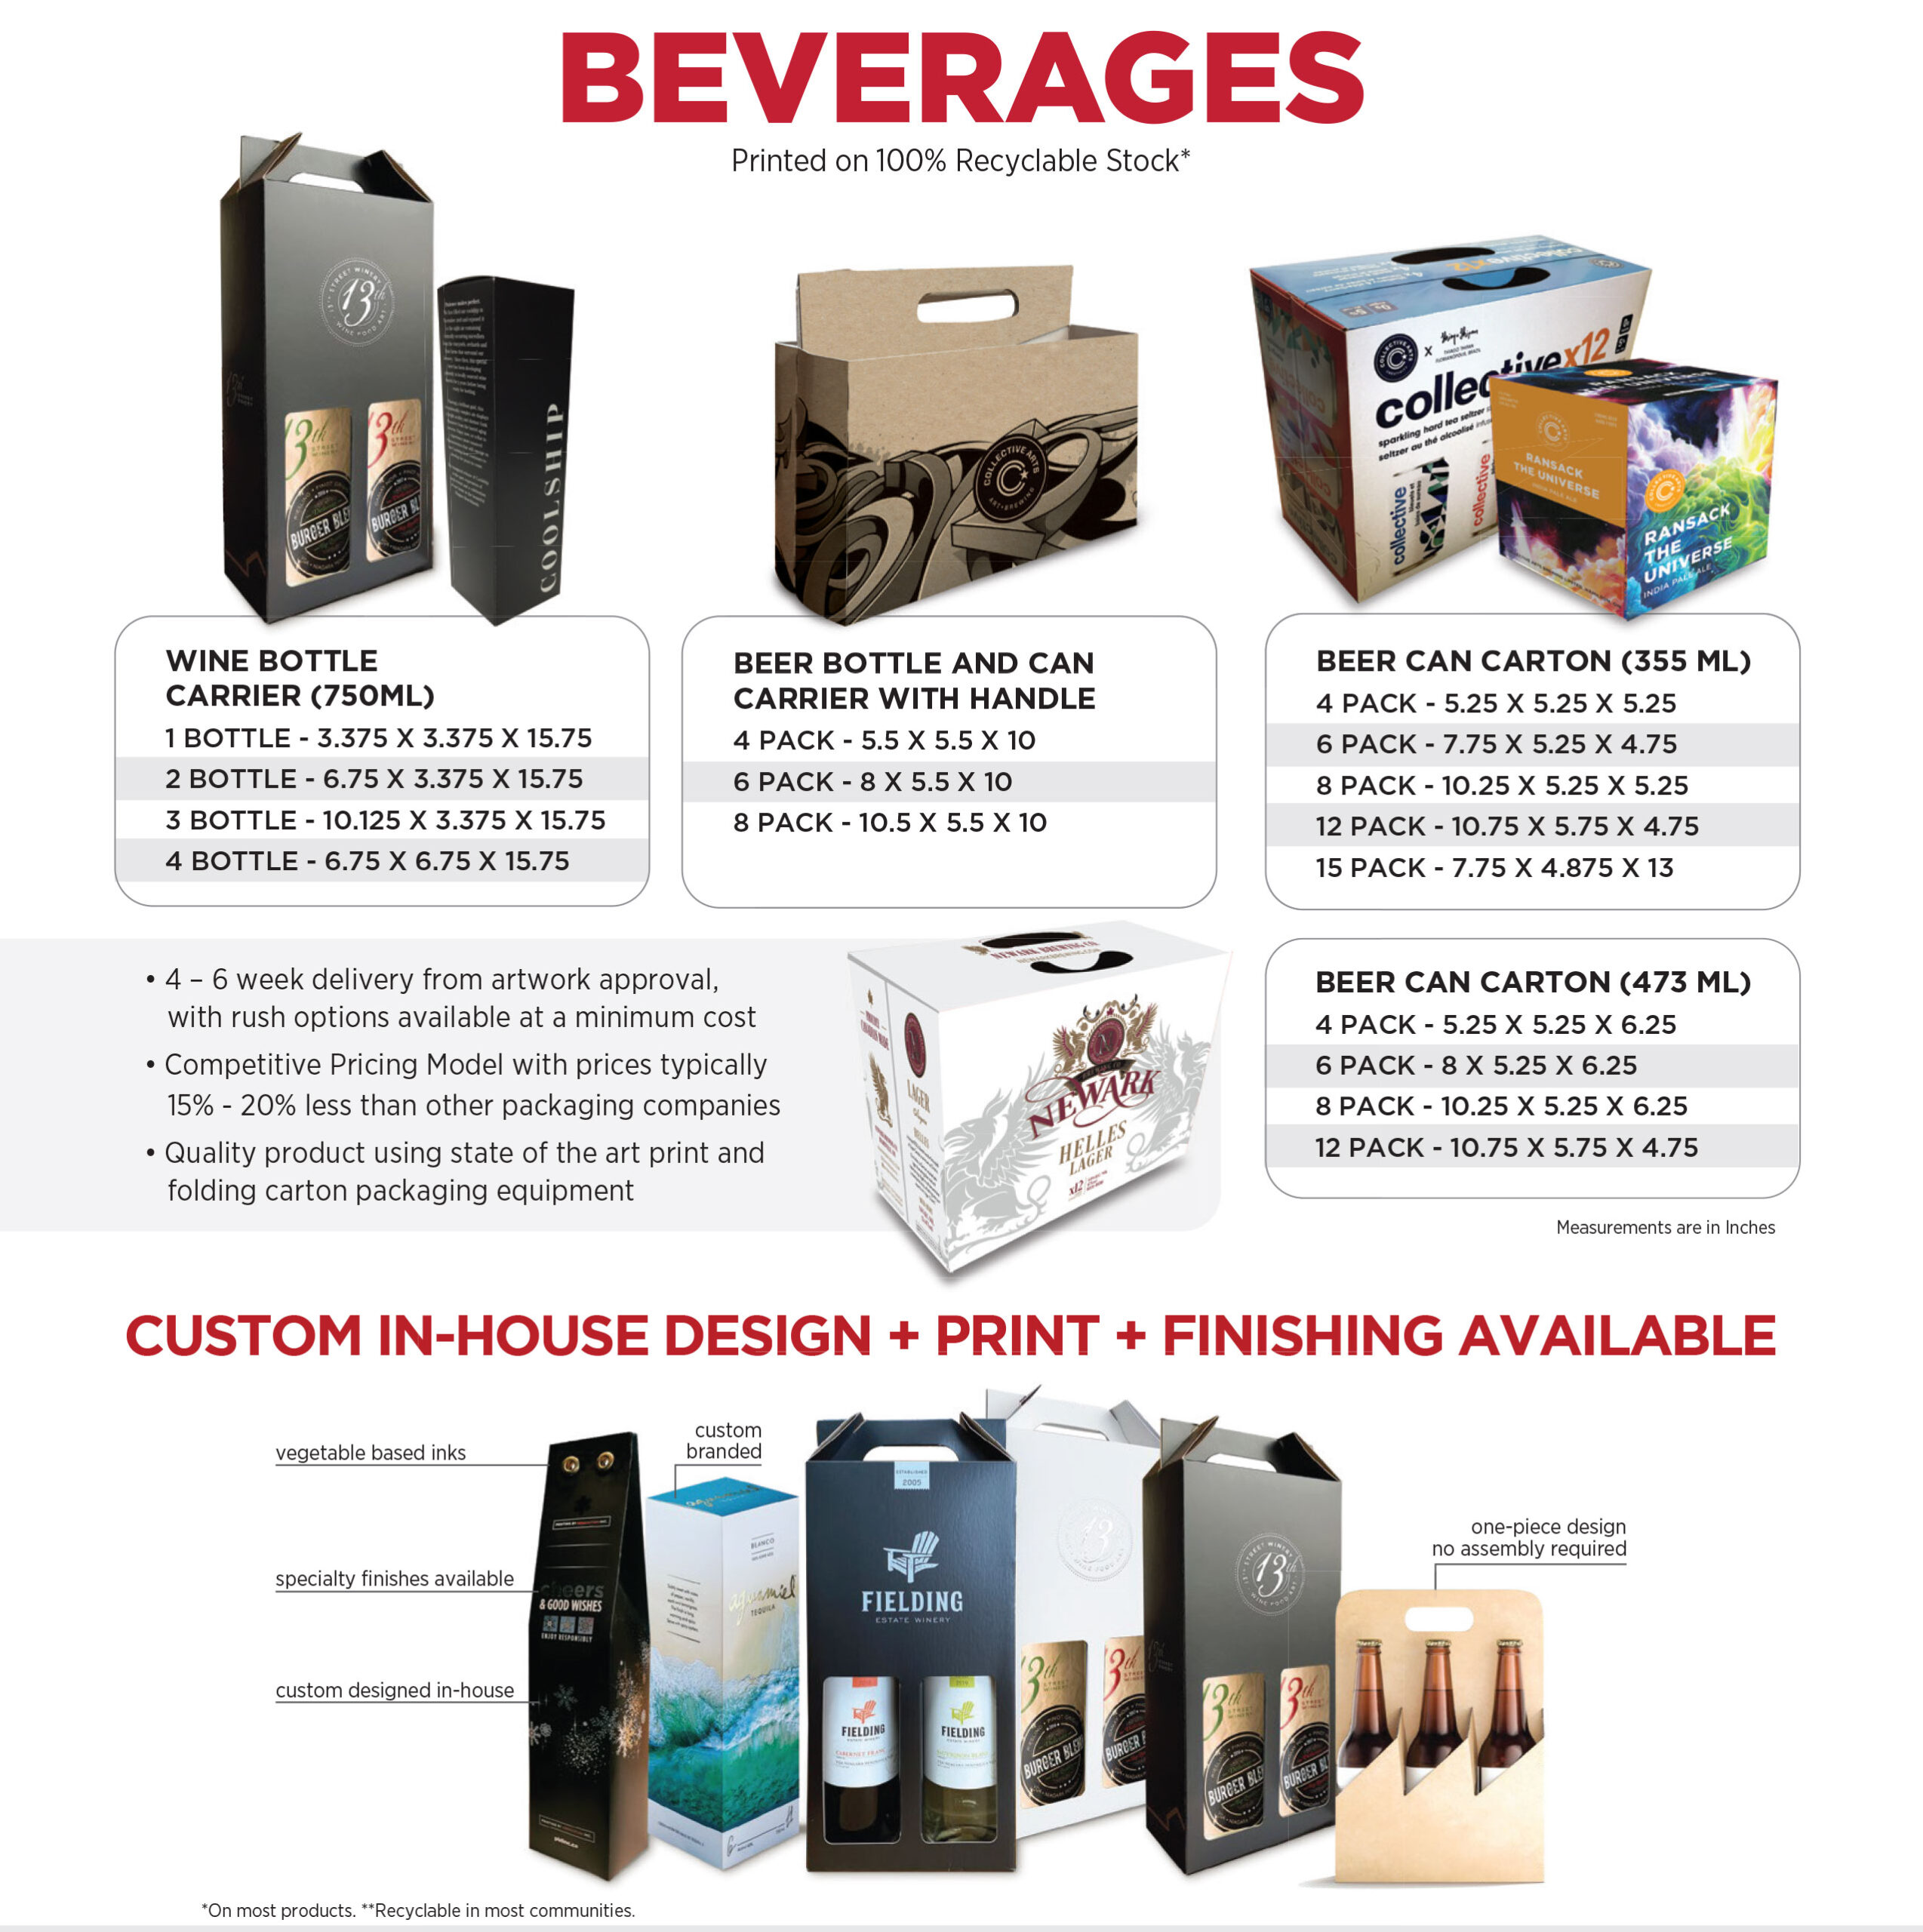 Beverage packaging style chart